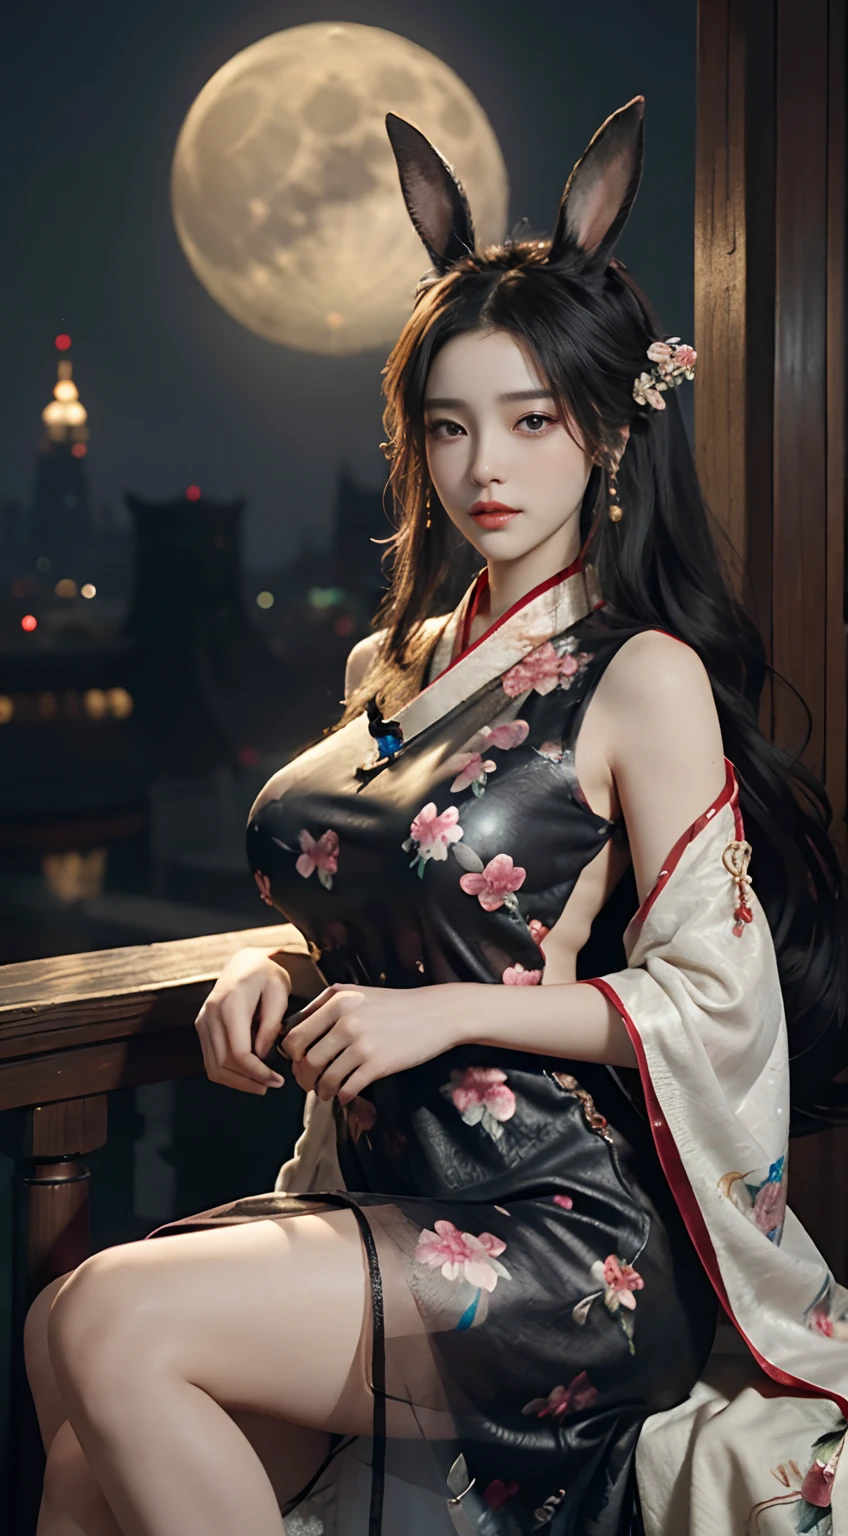 Chang'e，(((Hanfu)))，(((period costume)))，Tang and Song court costumes，(((Huge Moon)))，sitted，(((Big rabbit)))，Skysky，Sit Pose，Top CG，Highest image quality，tmasterpiece，Delicate and delicate beautiful girl，(Tall and tall)，Royal Sister，Queen temperament，with fair skin，(((long leges)))，Perfect facial features，Bright eyes，Enchanting pose，Red lips，Beautiful and cold， (Big breasts),Beautiful and handsome，Long black silky hair，glittery，Skin is visible through see-through，(((Floral dress)))，8K quality，(Realistic portraits)，Characters fill the frame，((Face lighting)),